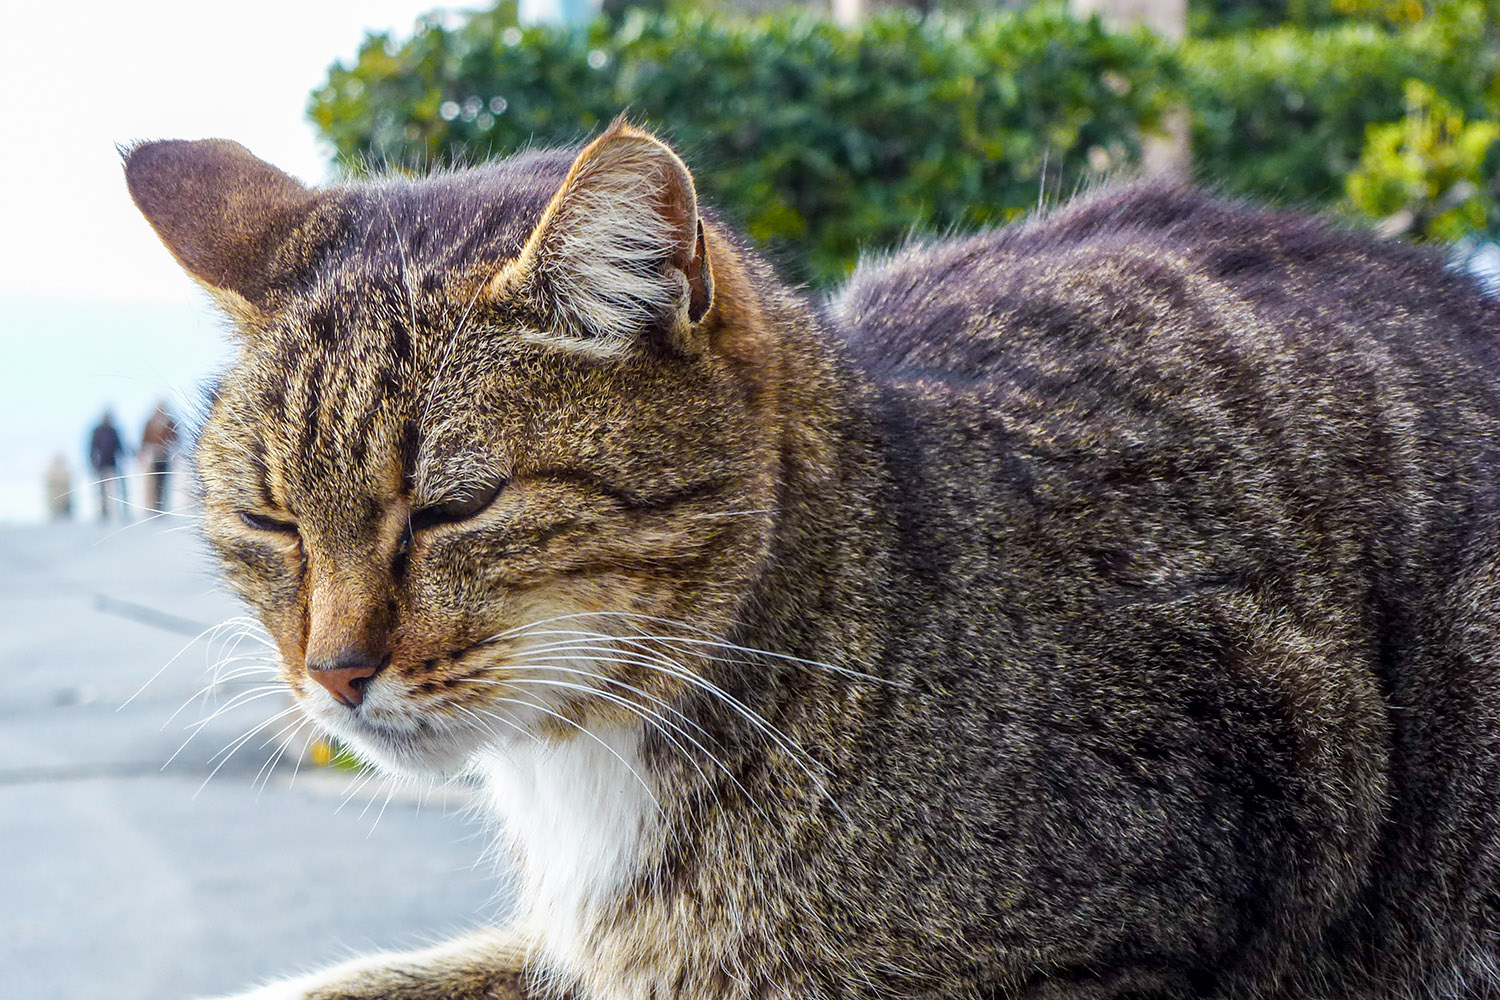 Most cats close their eyes when spoken to, as illustrated by this one from Bordighera